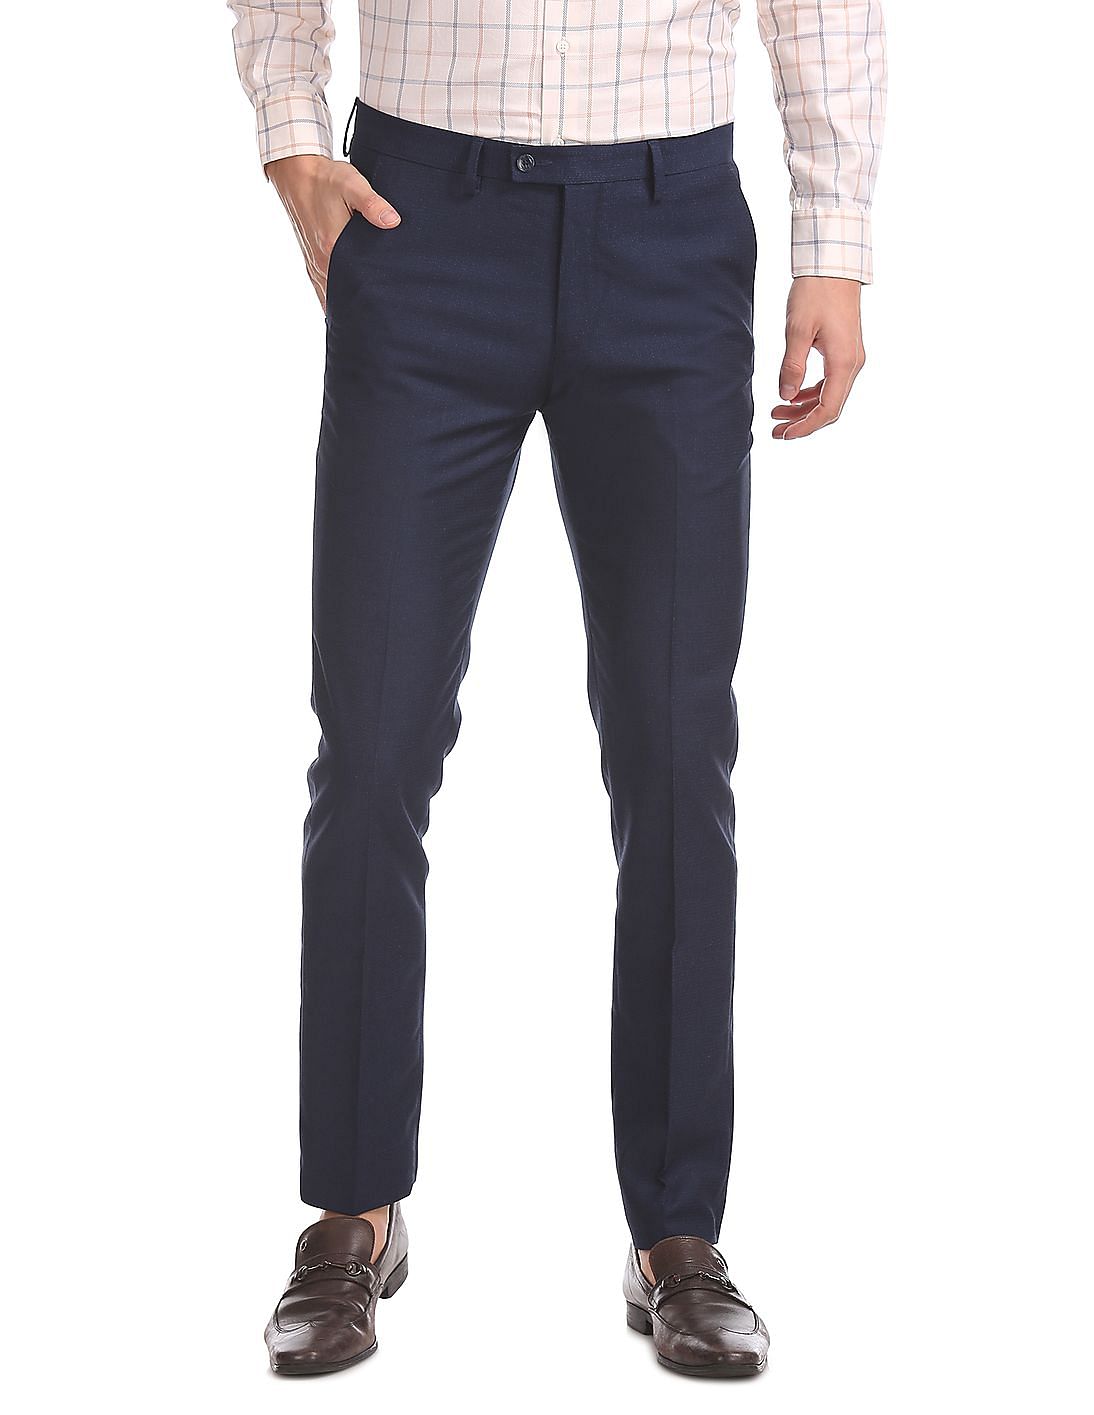 Buy Men Super Slim Fit Flat Front Trousers online at NNNOW.com